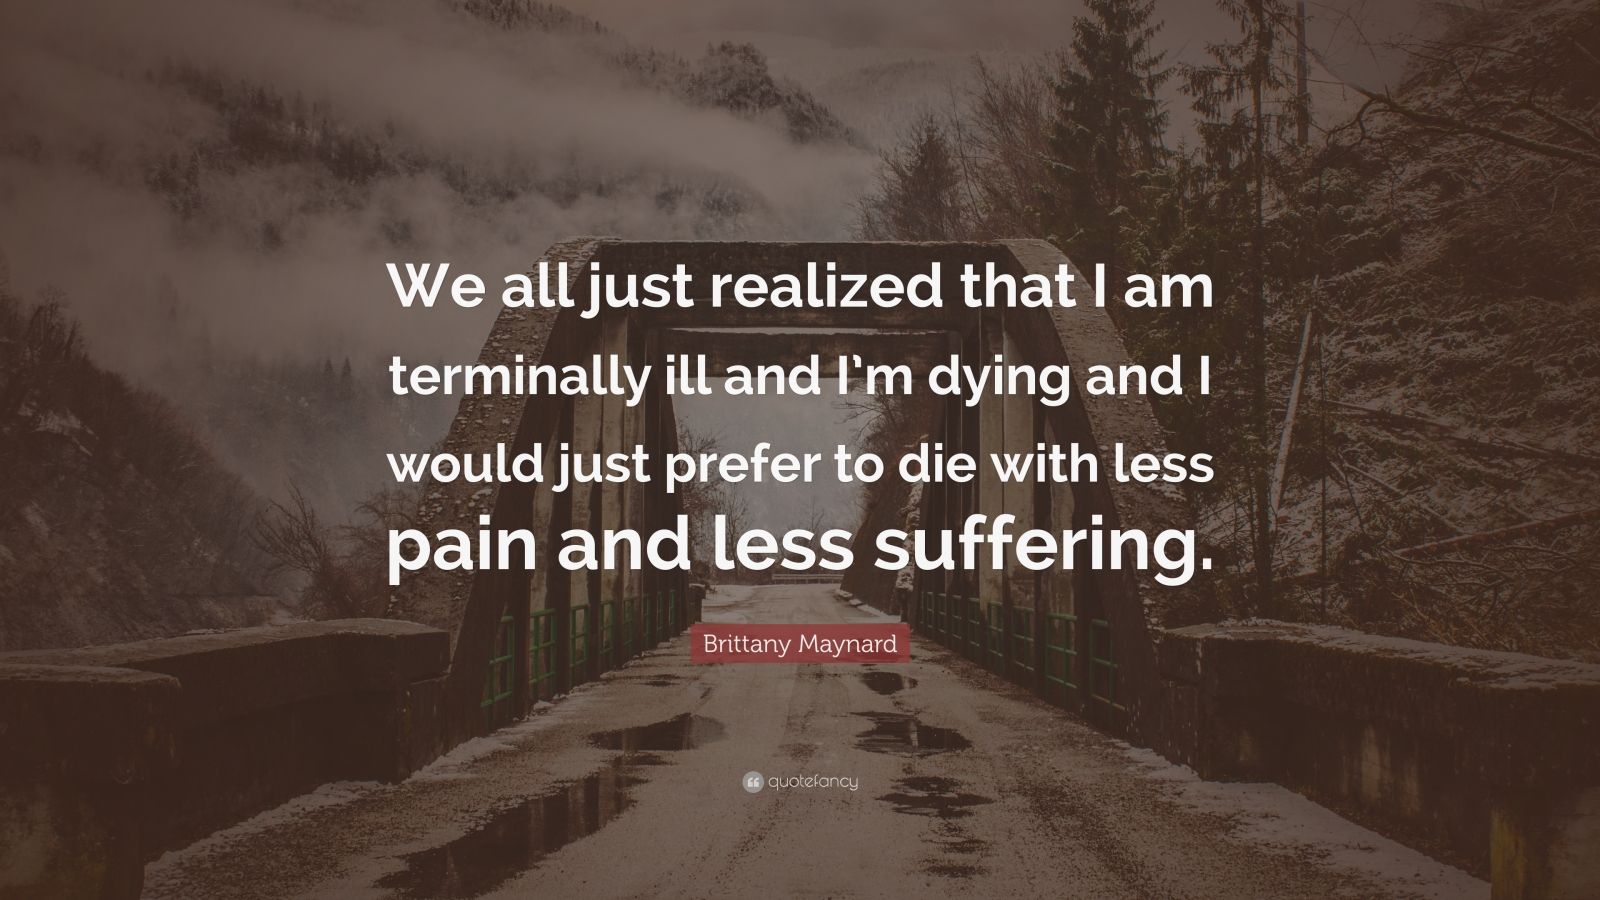 positive quotes for terminal illness